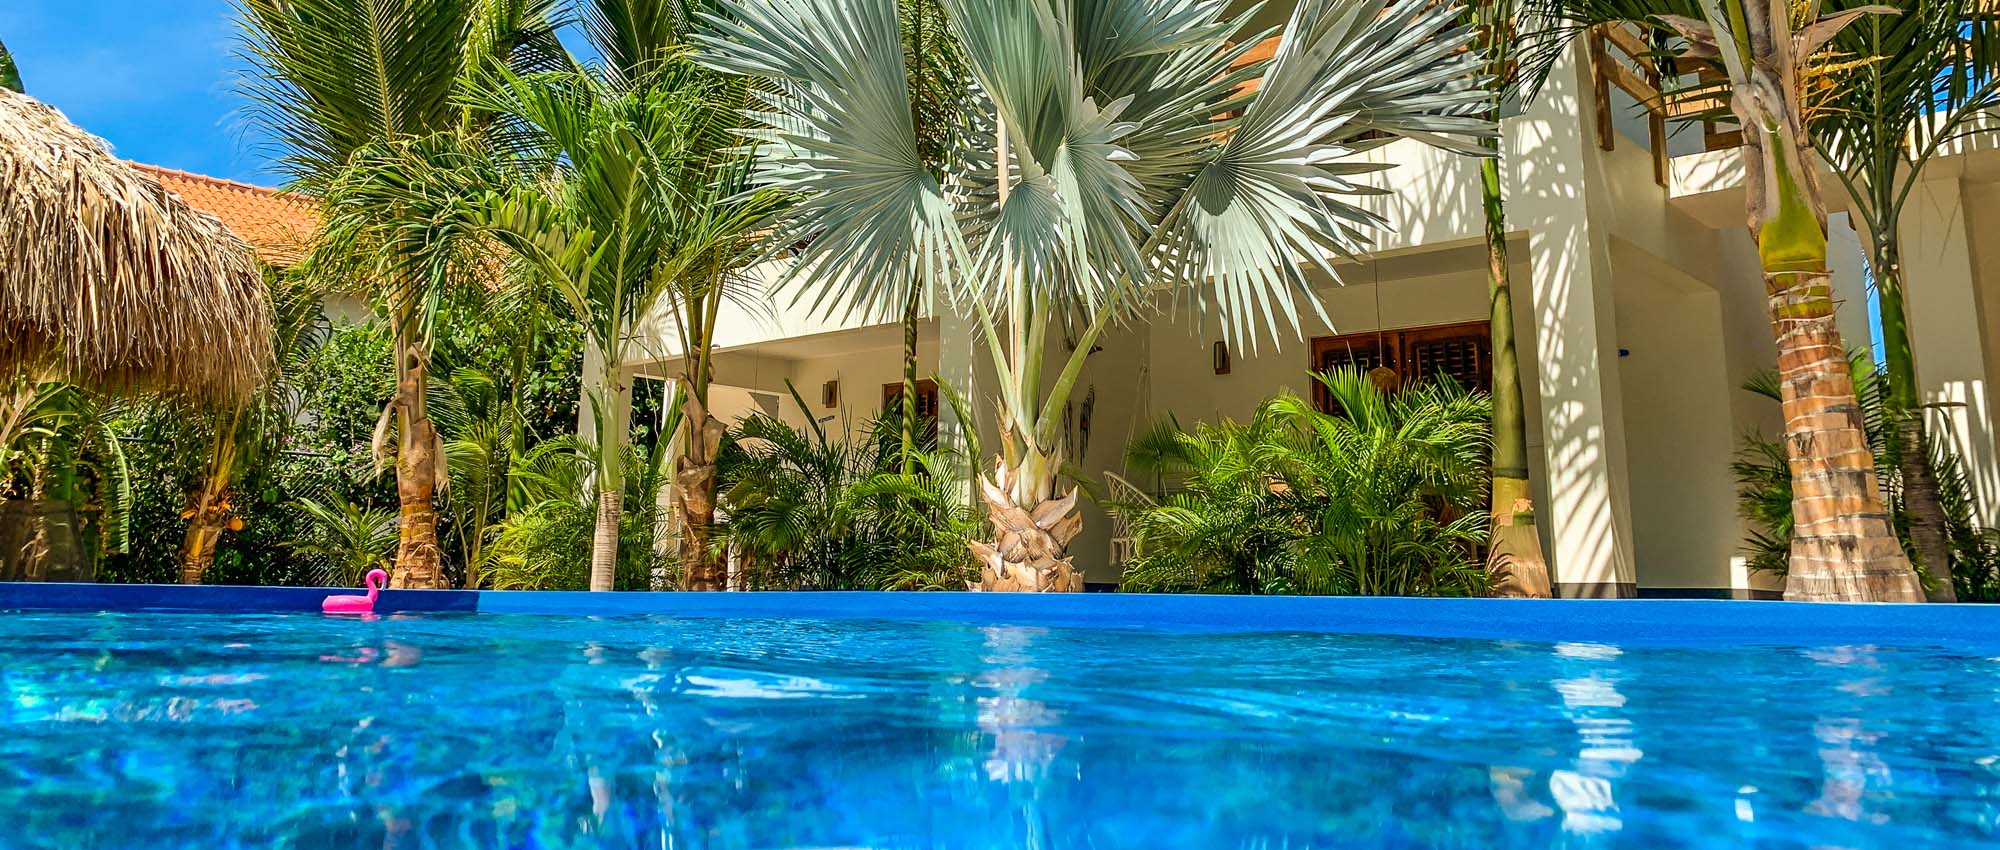 Outdoor pool area surrounded by palm trees